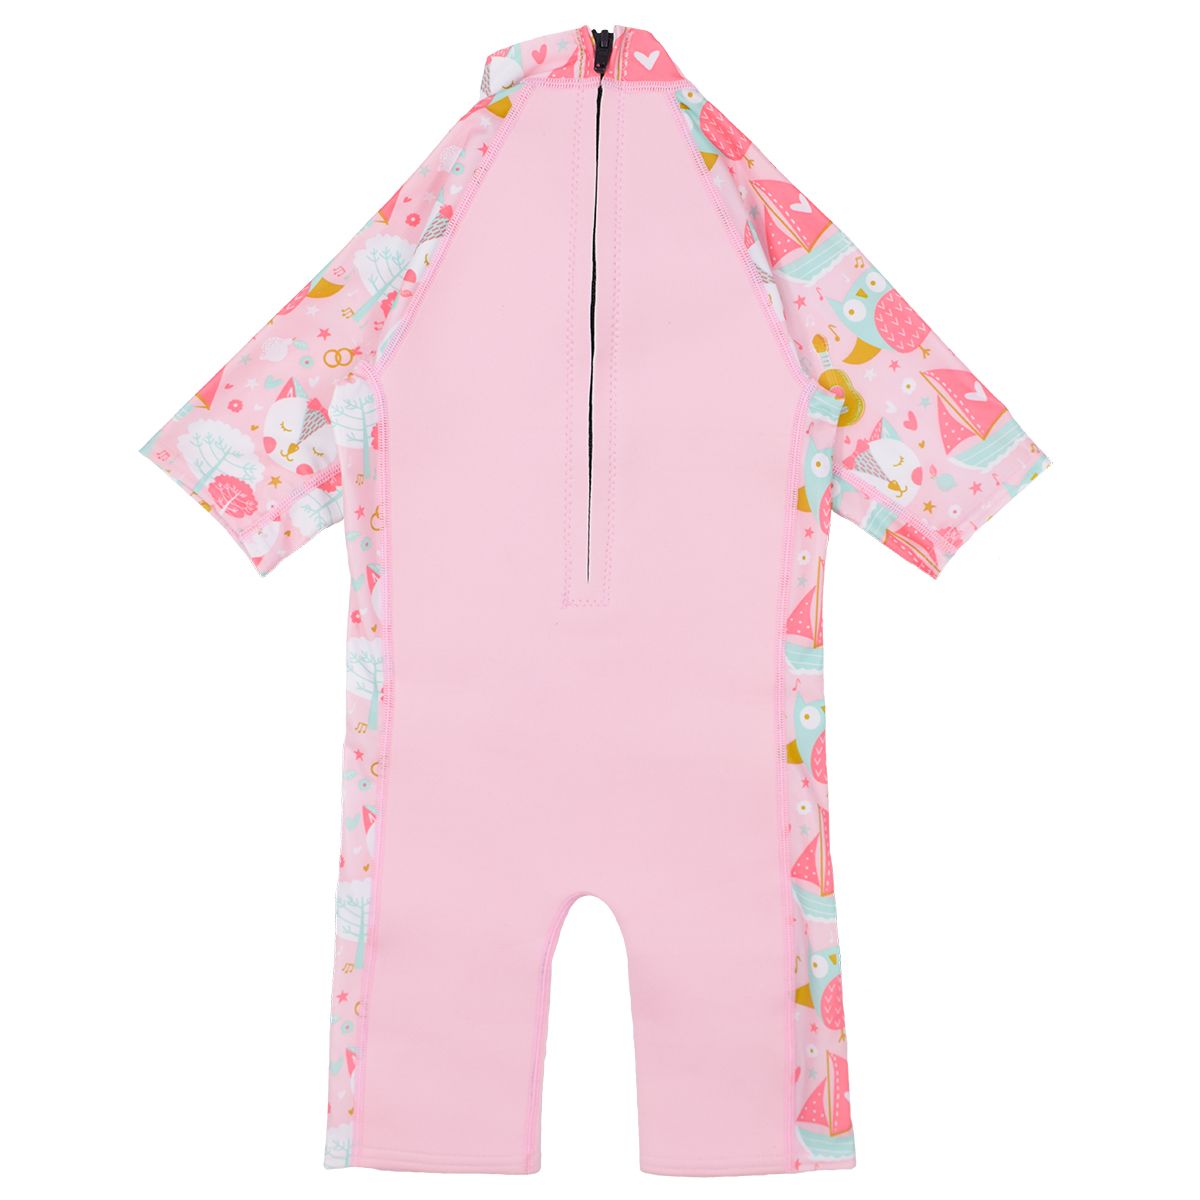 One piece UV sun and sea wetsuit for toddlers in baby pink. Cute kittens, owls, trees, guitars and seal boats print on sleeves, side panels and neck. Back.